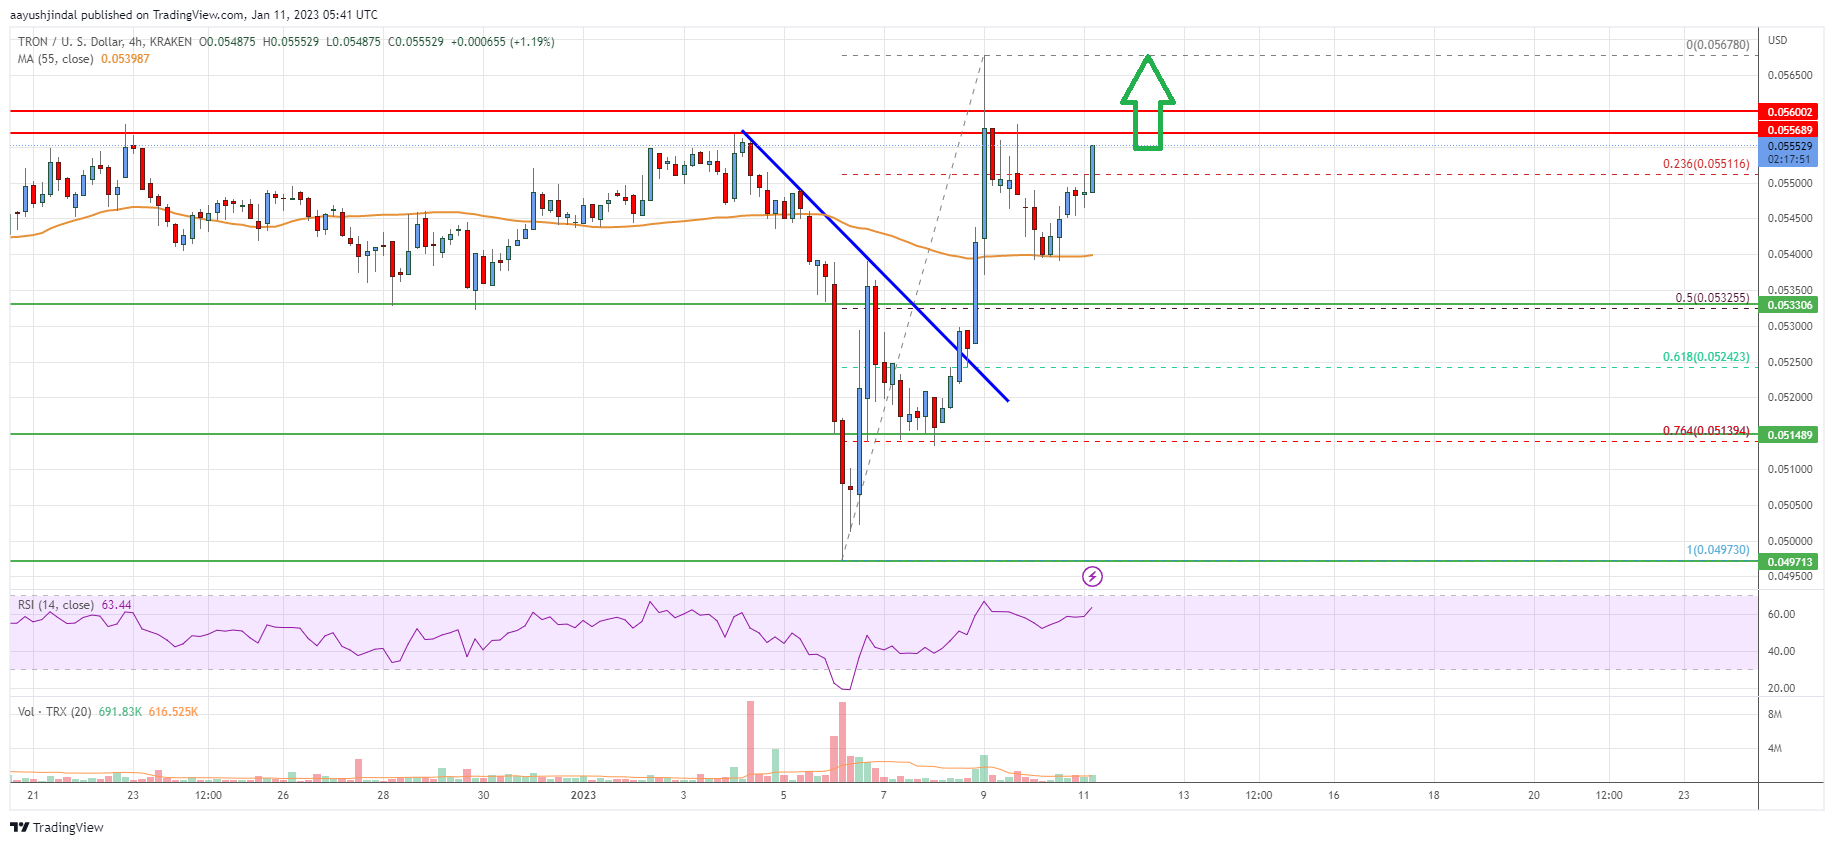 Tron (TRX) Price Analysis: More Gains Possible Above $0.055